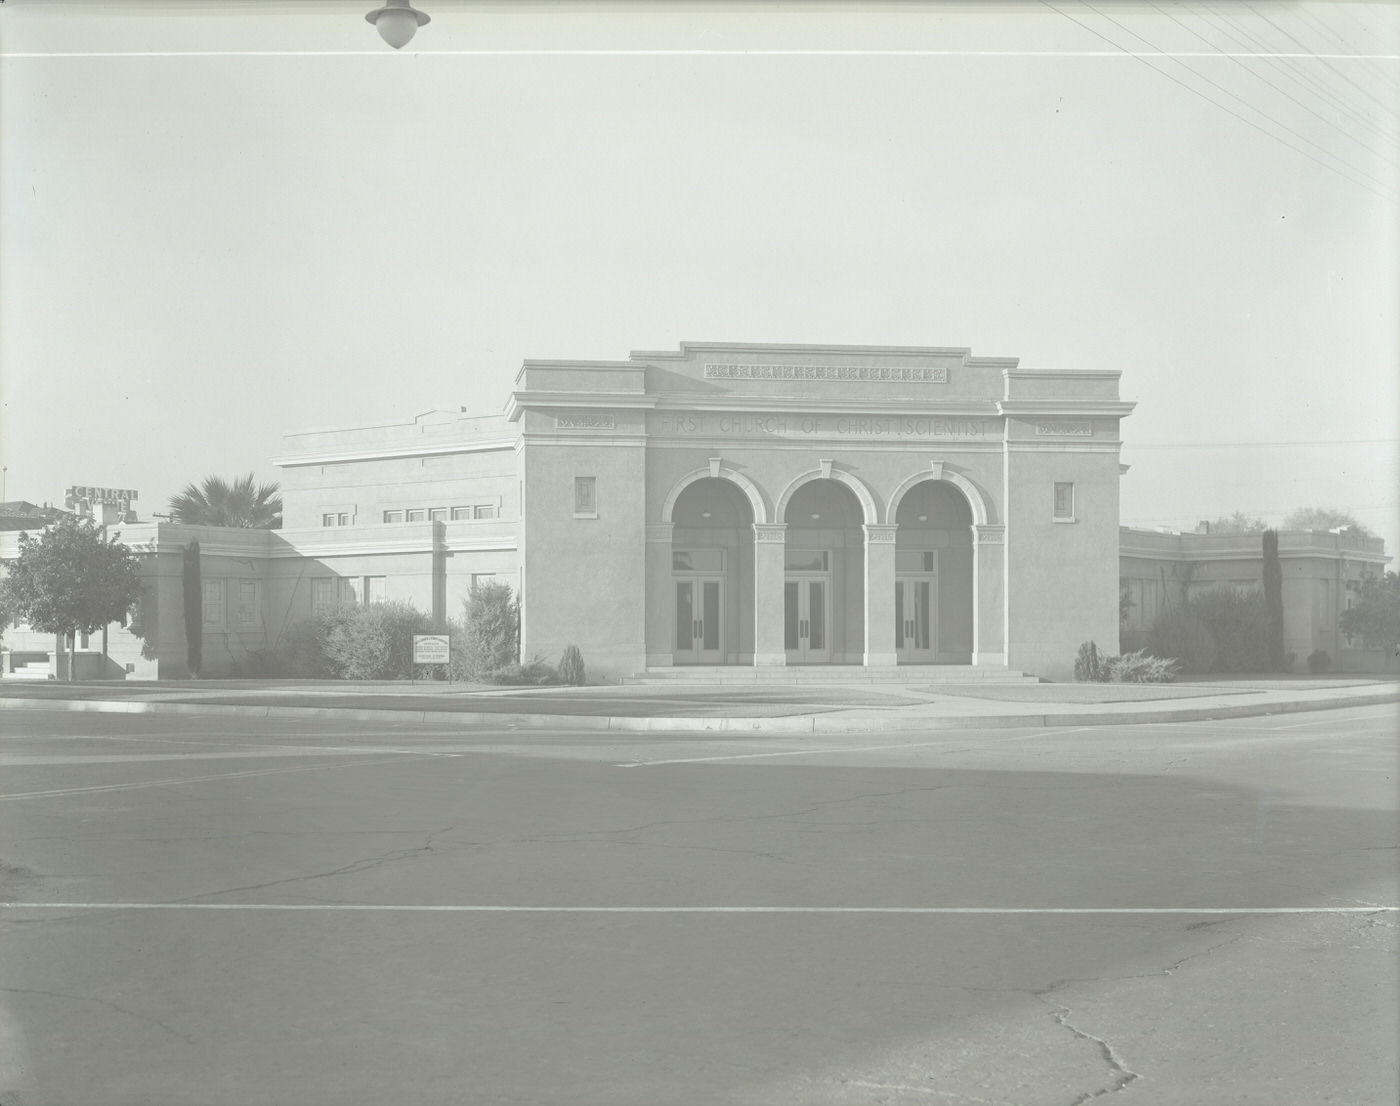 Christian Science Church Building Exterior. This church was located at First St. and Roosevelt Rd. The date assigned to this photograph is approximate, 1930s